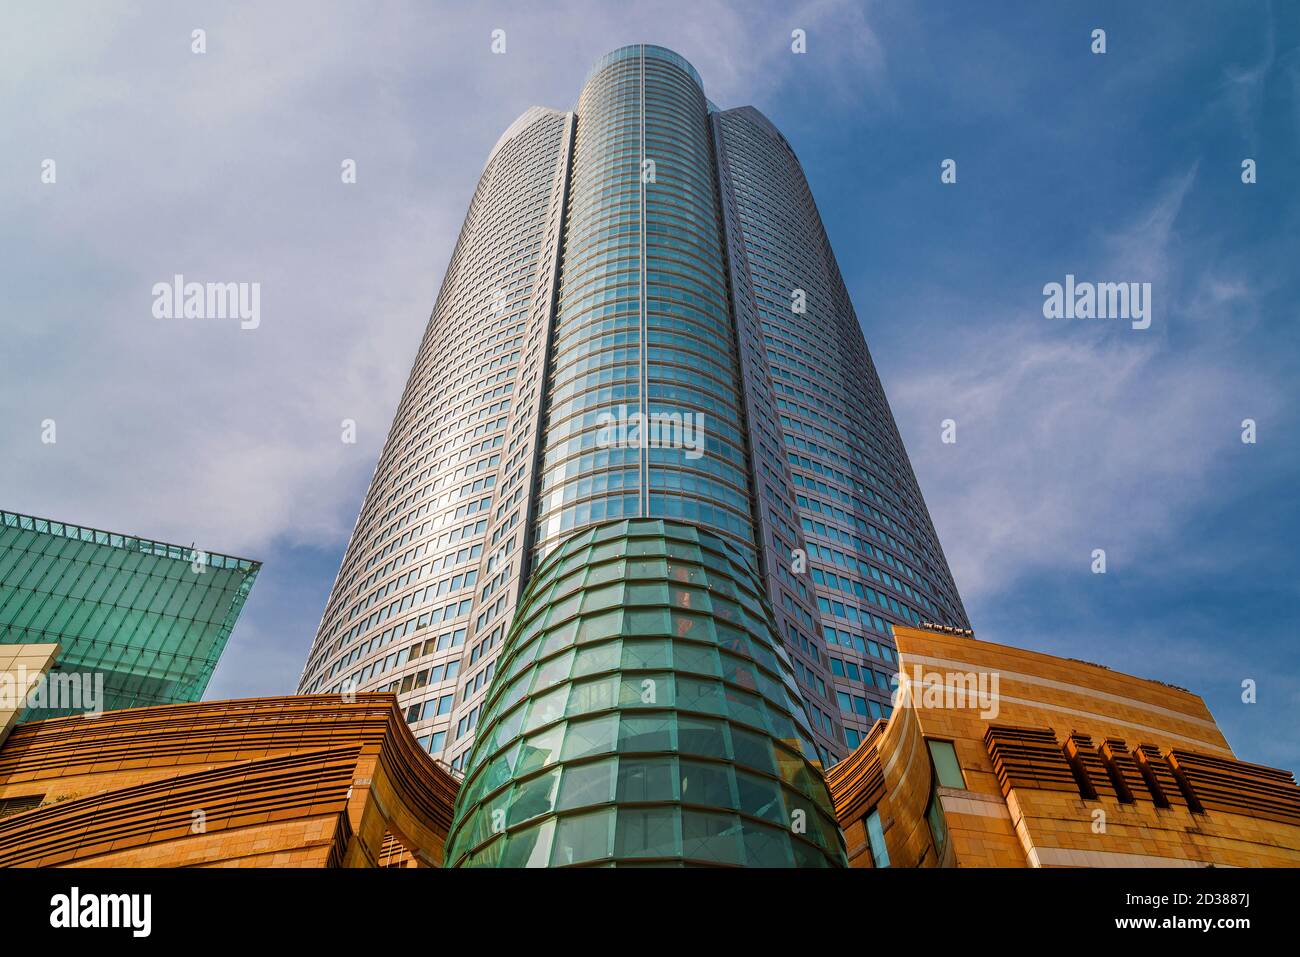 Roppongi Hills shopping and cultural center with the Mori Tower, one of the tallest building in Tokyo Stock Photo